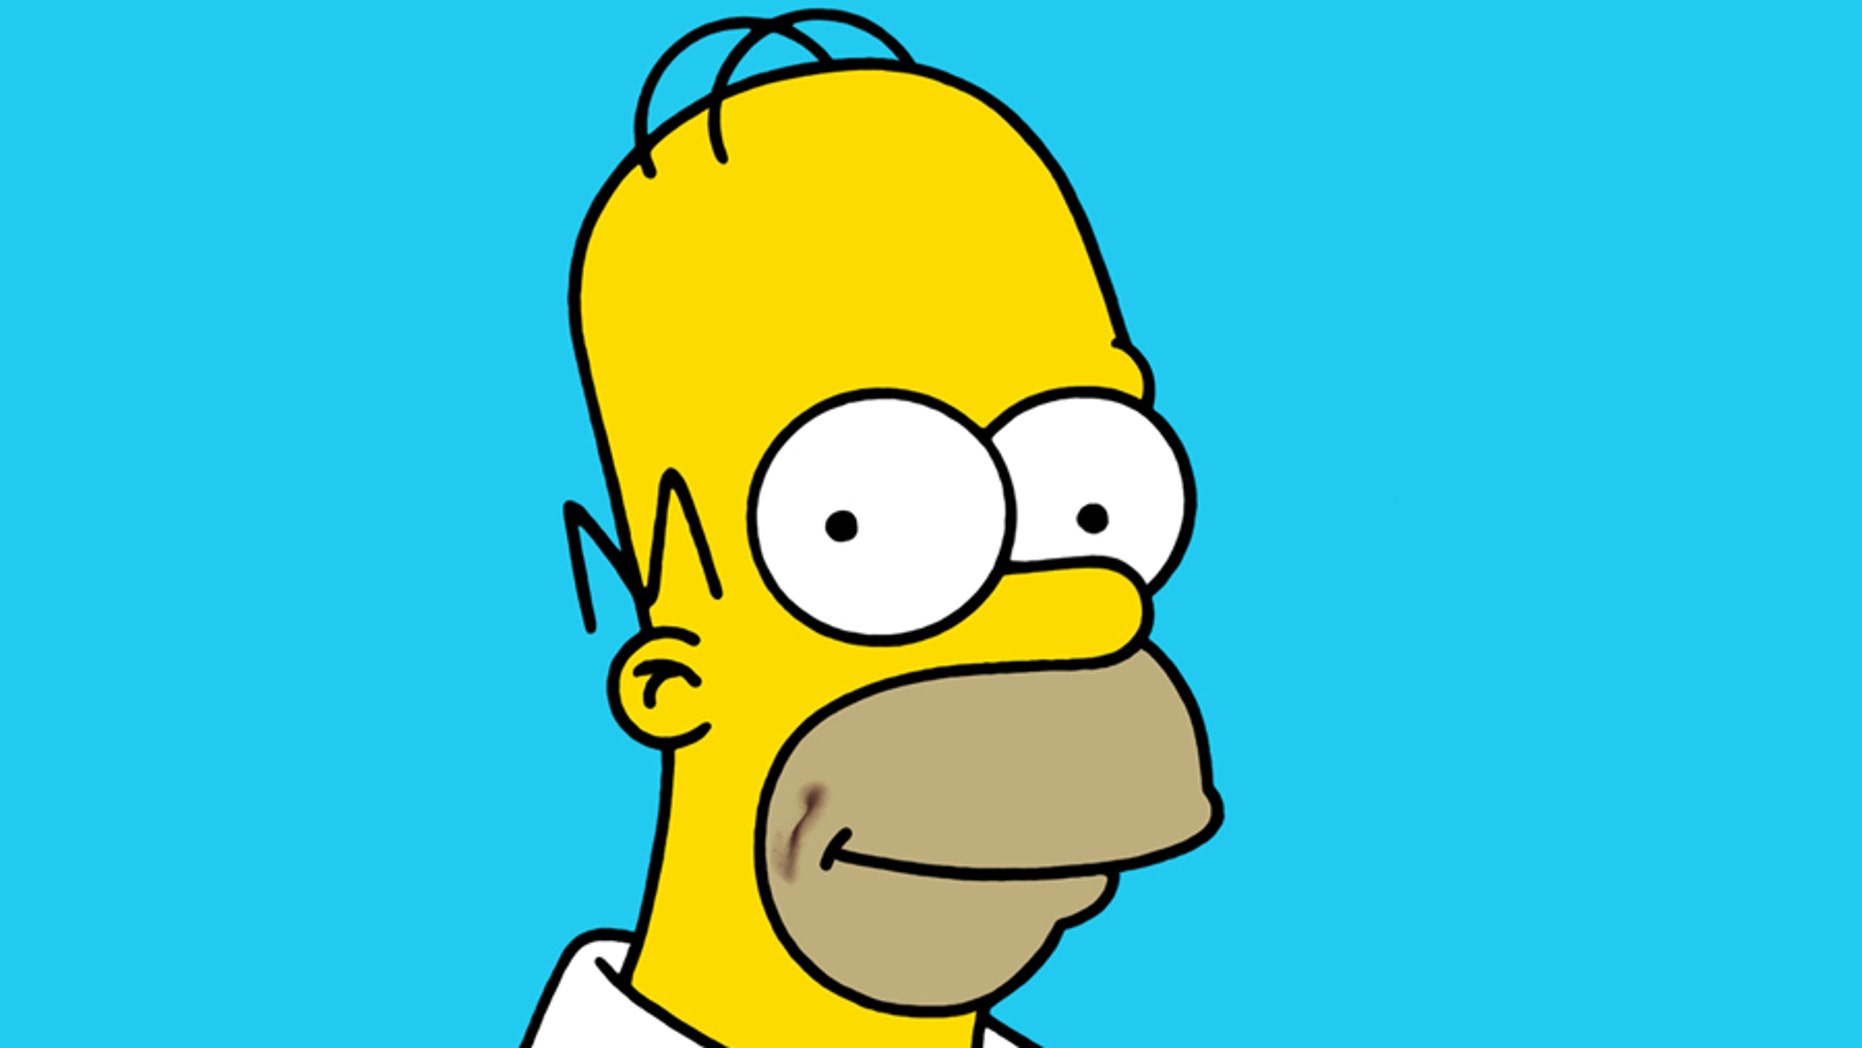 Simpsons Producer Corrects Vatican Homer Simpson Is Not Catholic 